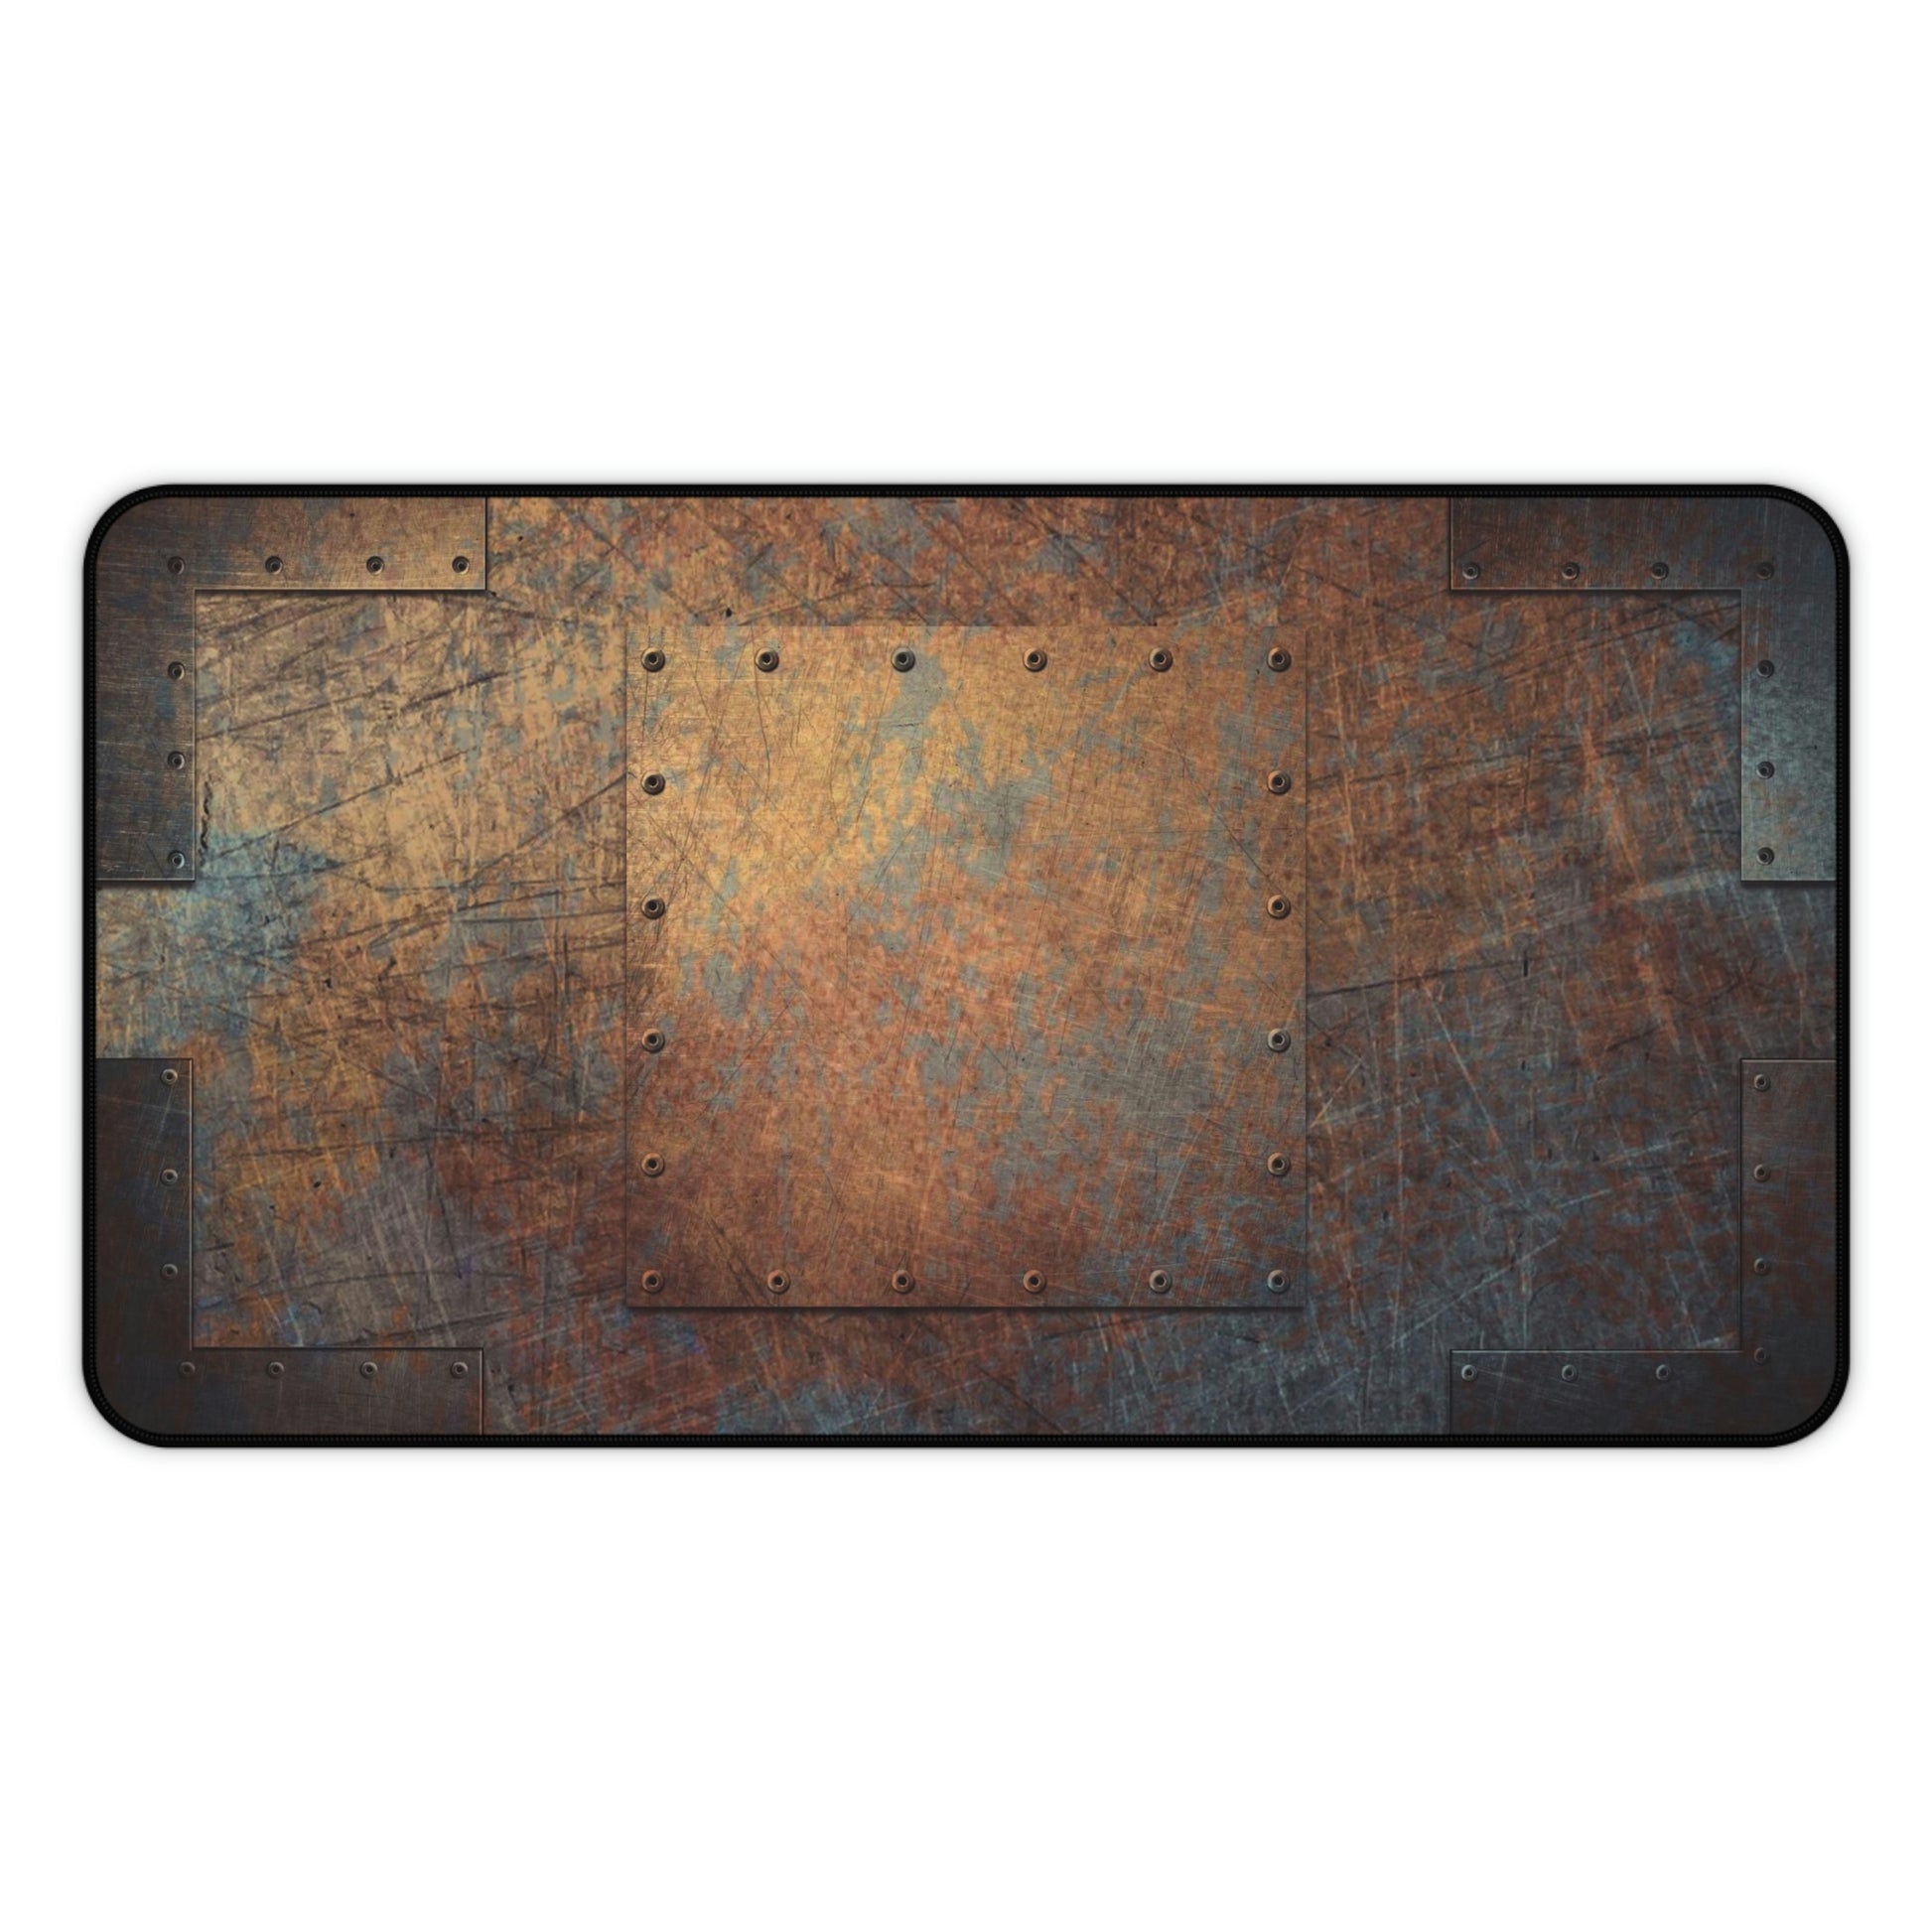 Steampunk Themed Desk Accessories - Patinated, Weather Beaten, Riveted Copper Sheets Print on Neoprene Desk Mat 12 x 22